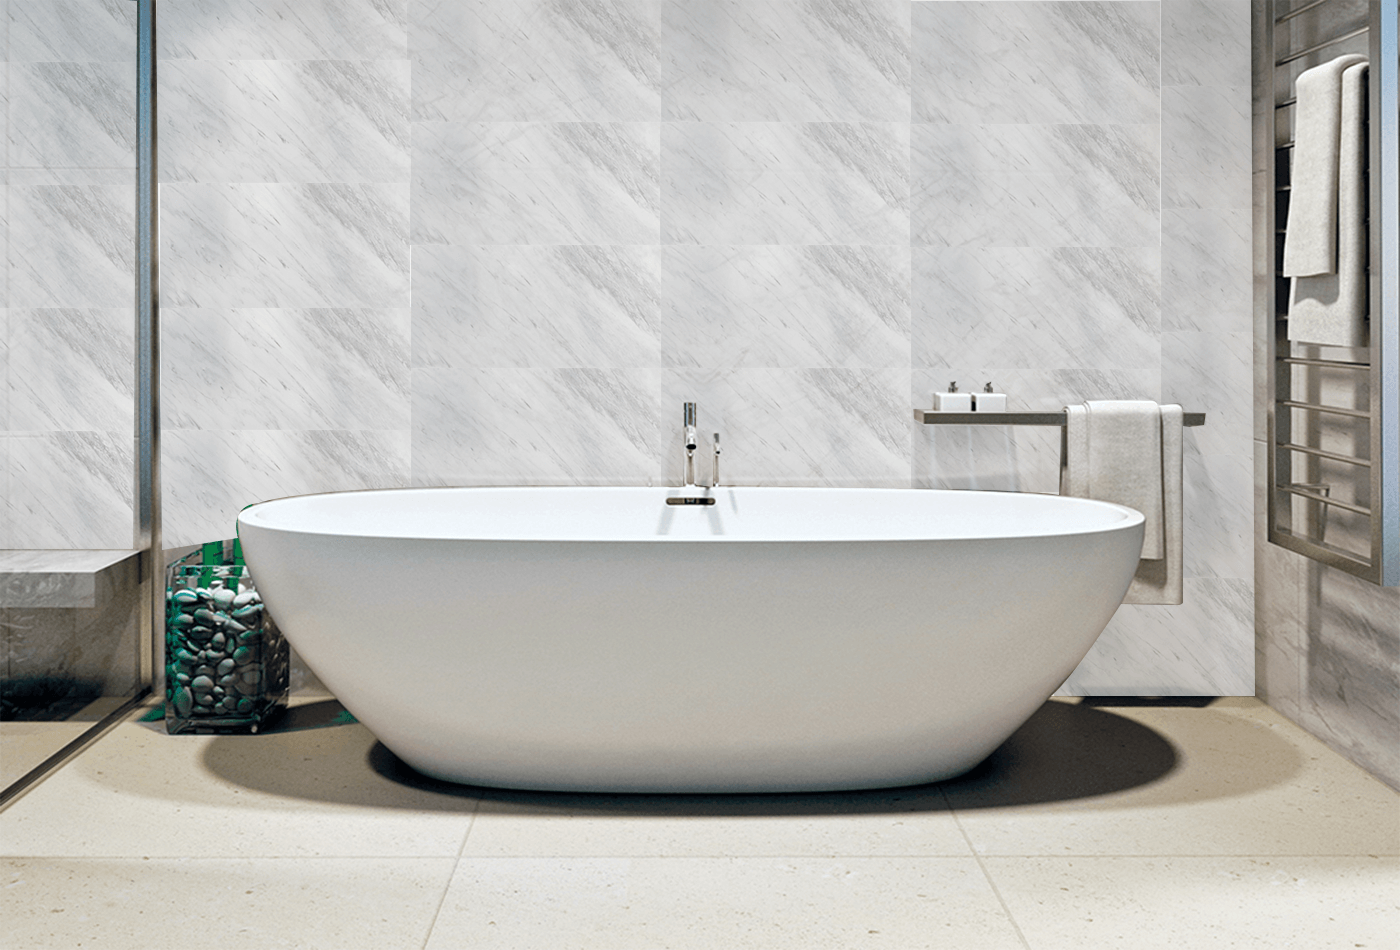 Volakas Marble Tile; For Everyday Clean and Fresh Look